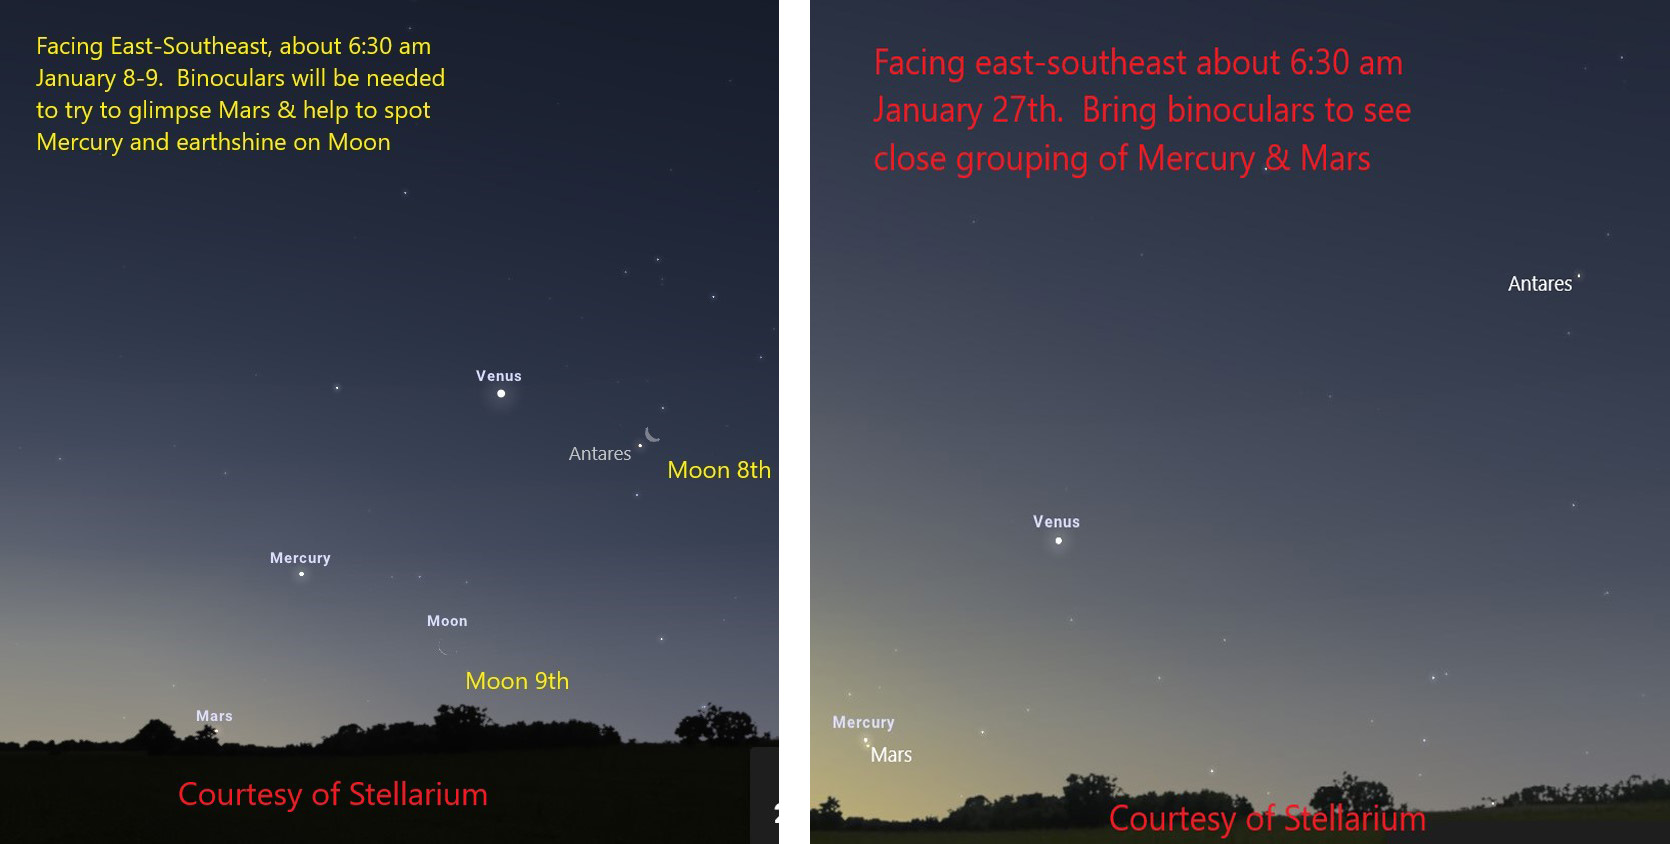 Venus shines brightly before dawn in January, with Mercury offering a medium and Mars a tough challenge with binoculars. 